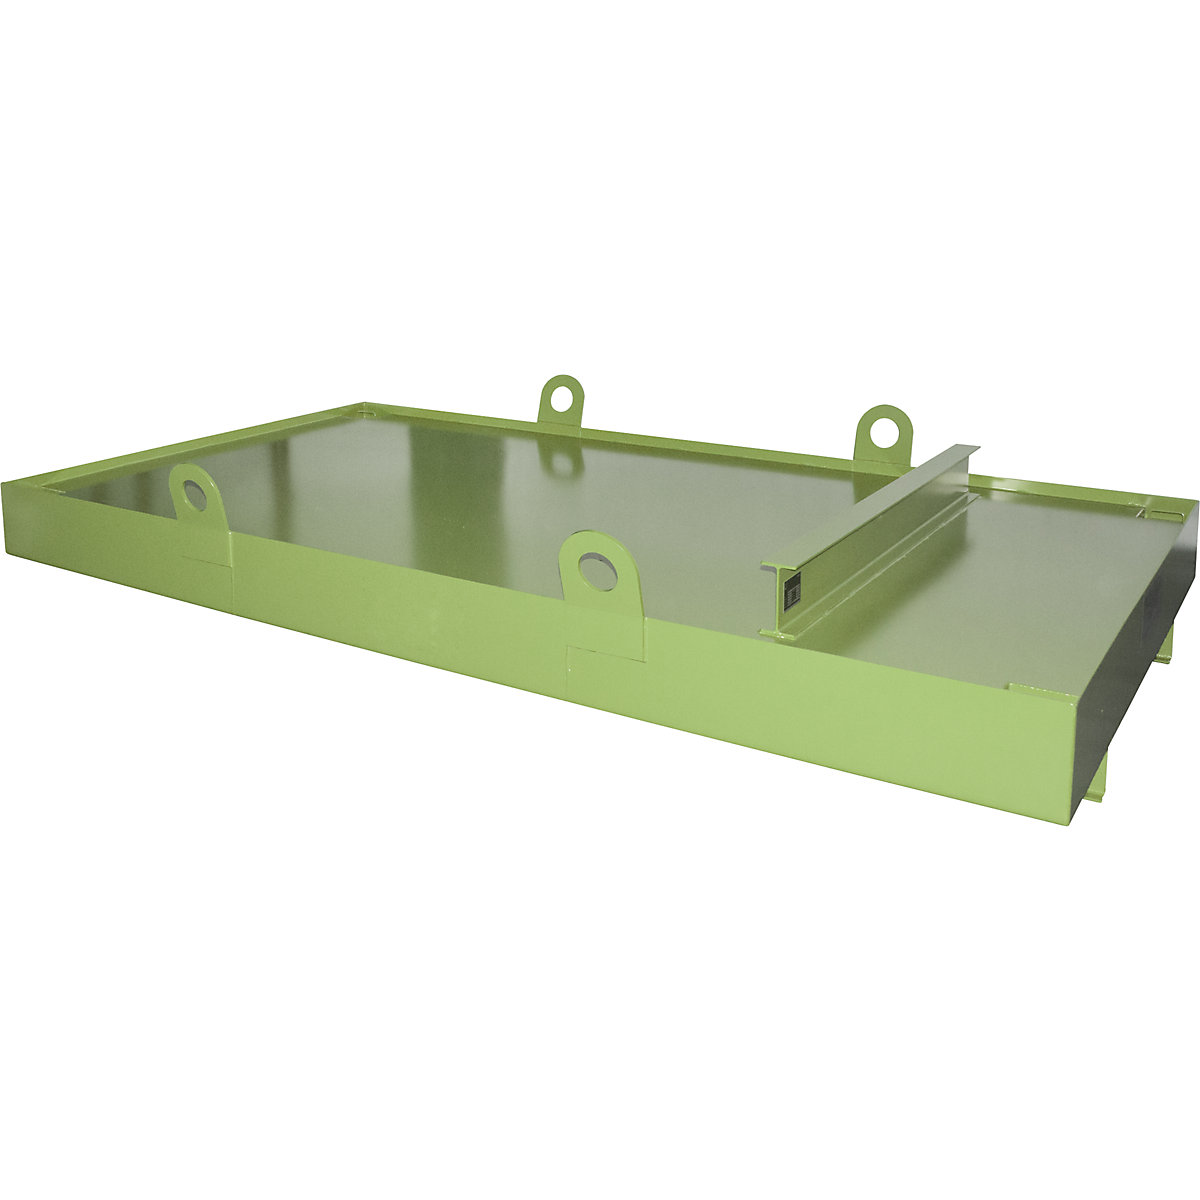 Sump tray for skip trailer – eurokraft pro, for skip trailers, sump capacity 1276 l, green-3